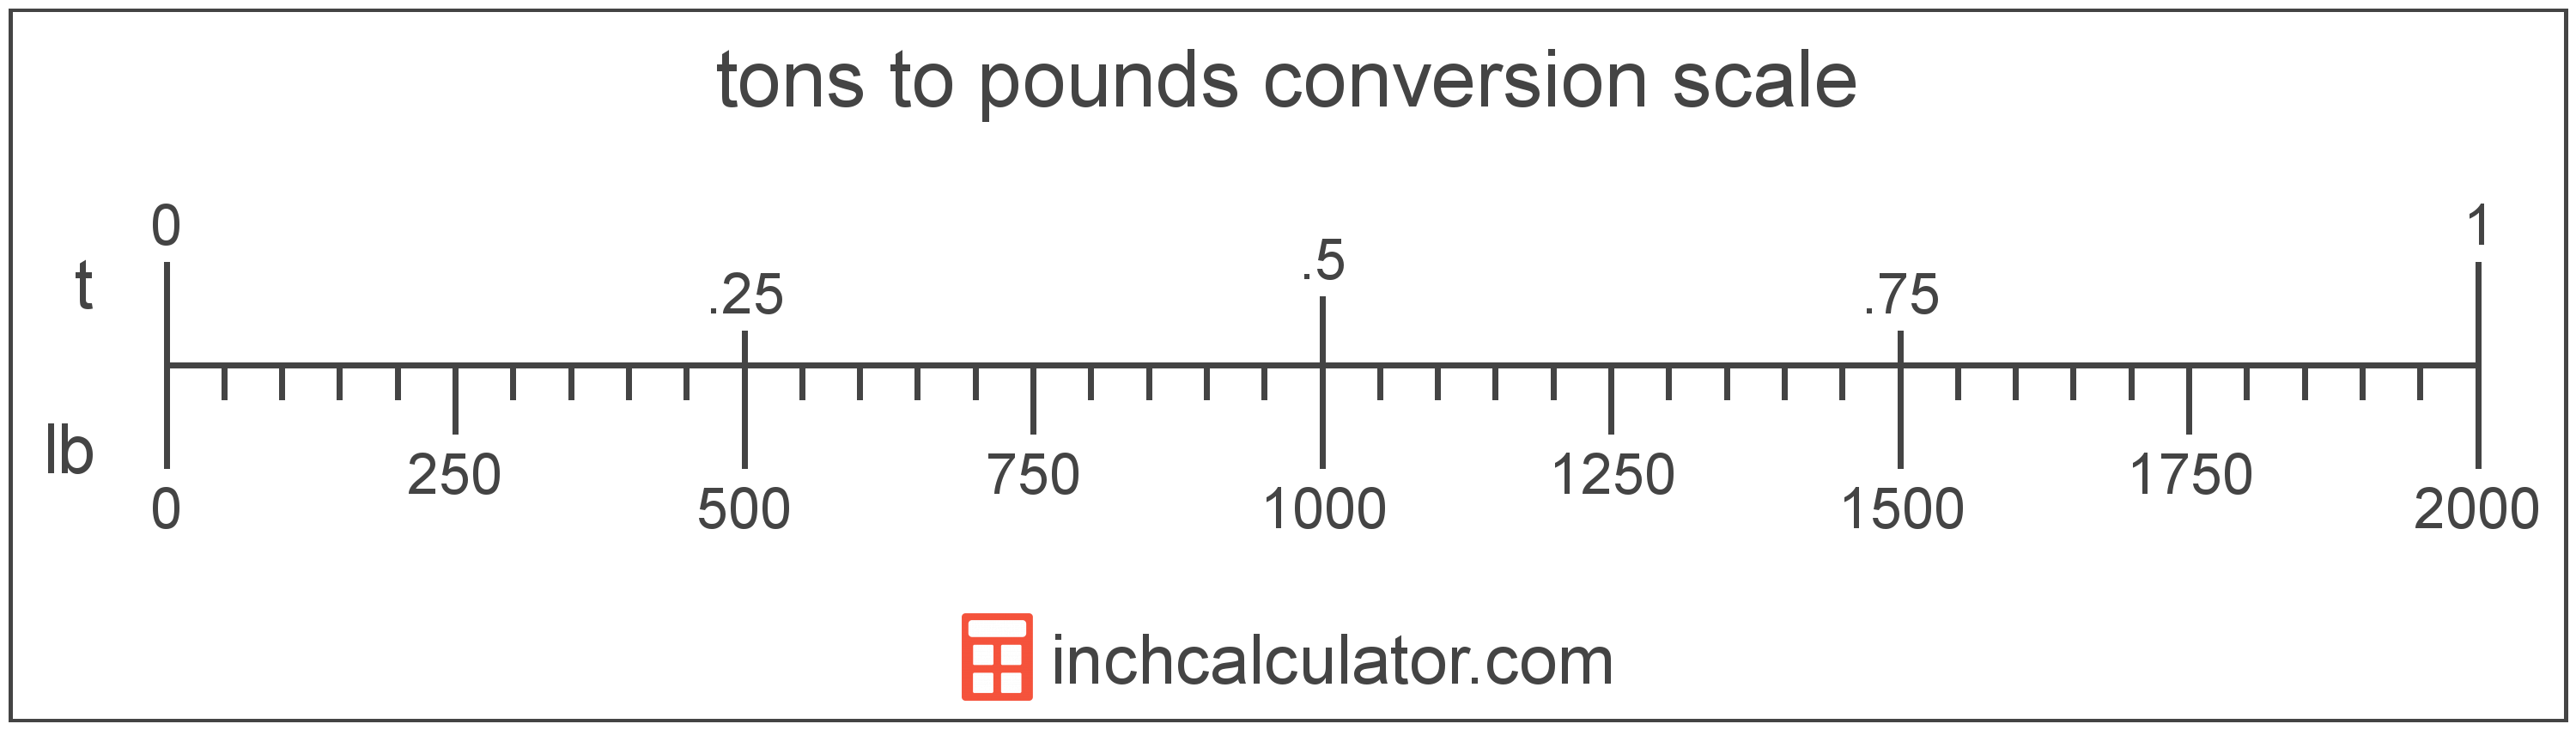 Pounds to Conversion (lb t) Inch Calculator